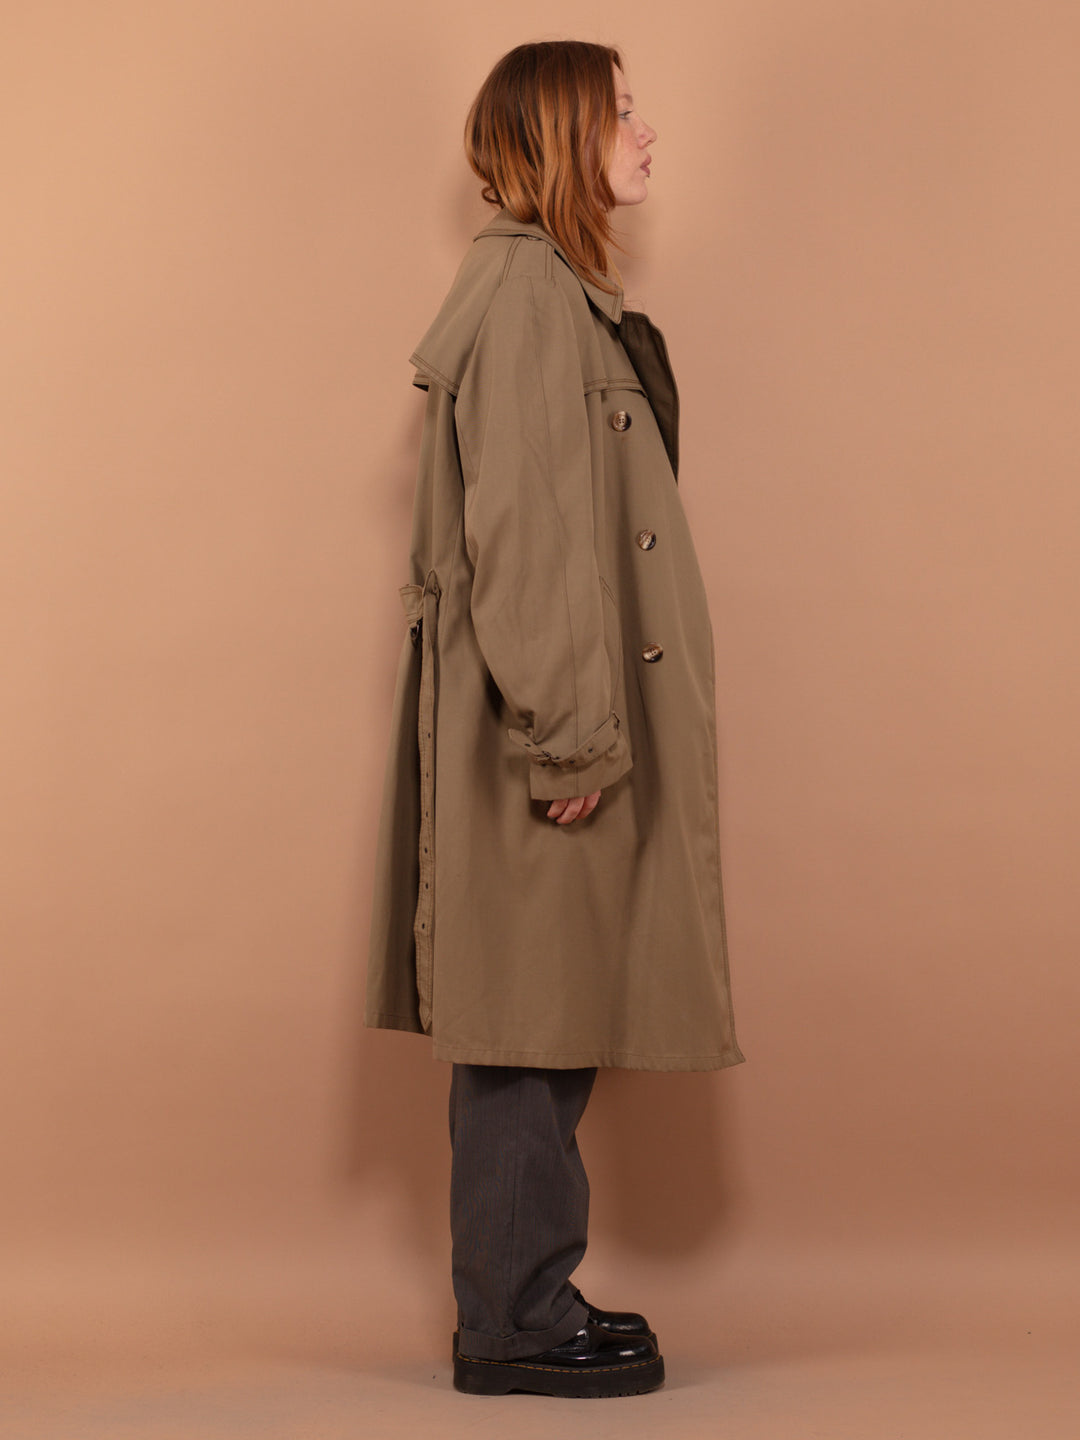 Vintage Trench Coat 90's, Size XL Khaki Trench Coat, Double Breasted Coat, Office Trench Coat, Commuter Trench Coat, Minimalist Outerwear